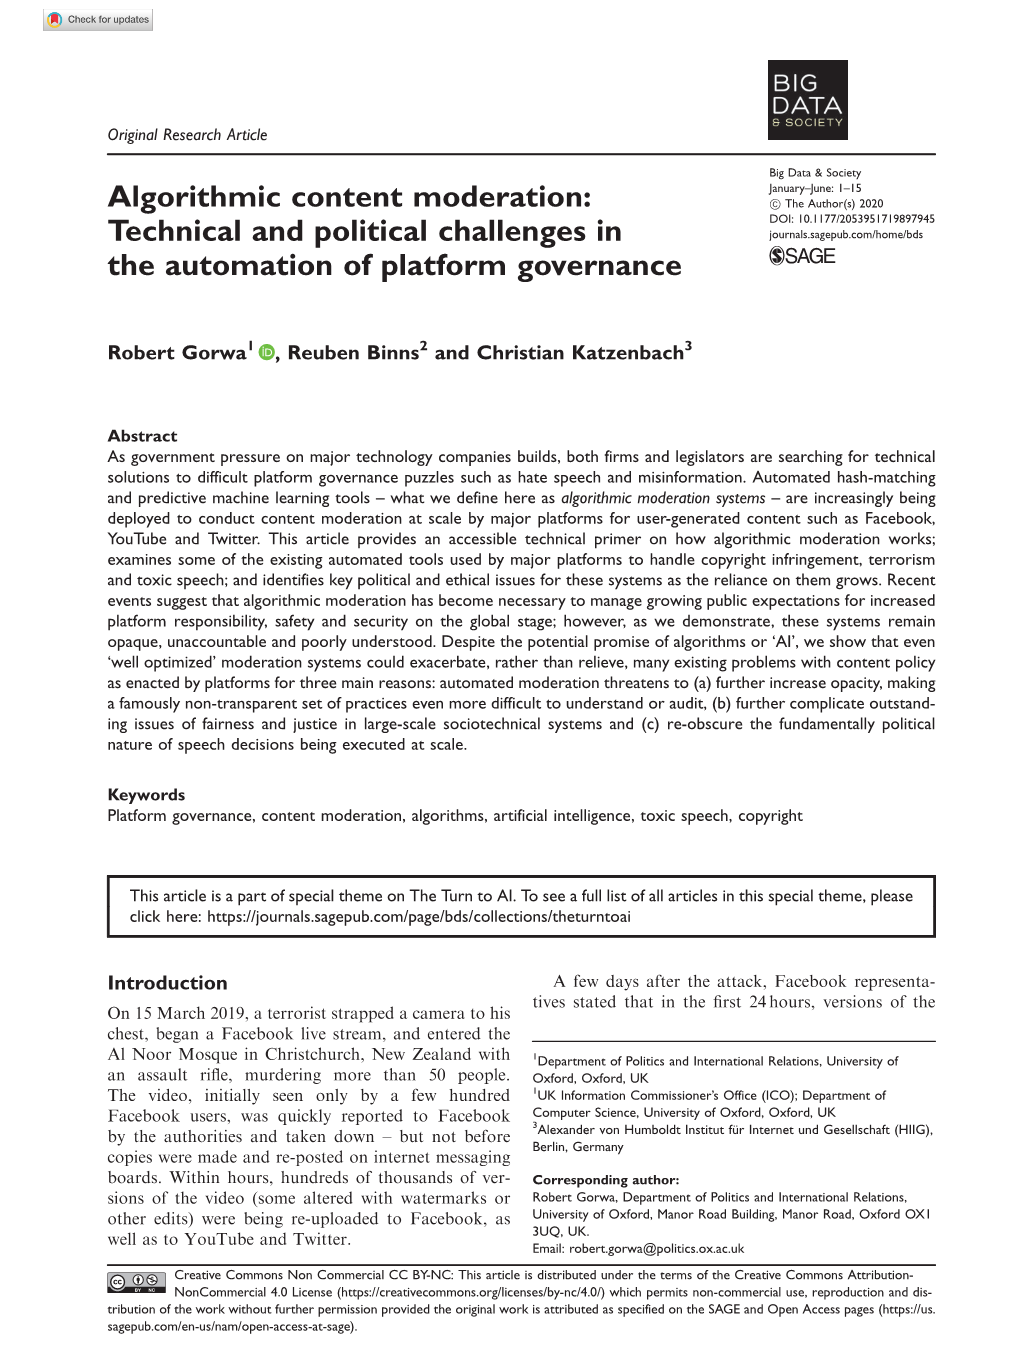 Algorithmic Content Moderation: Technical and Political Challenges